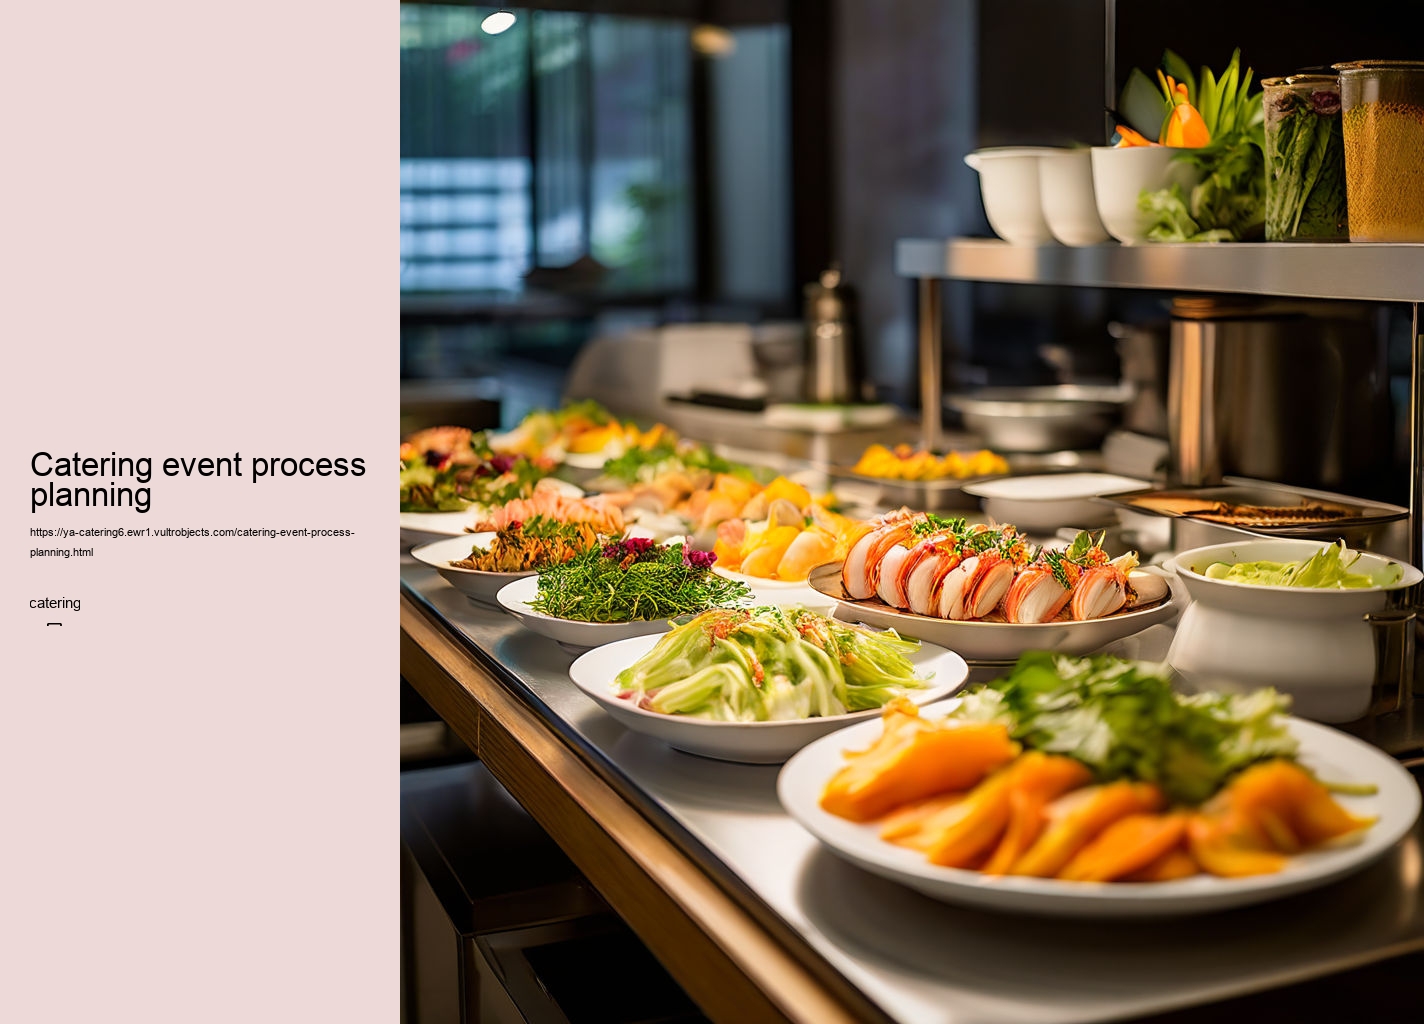 Catering event process planning